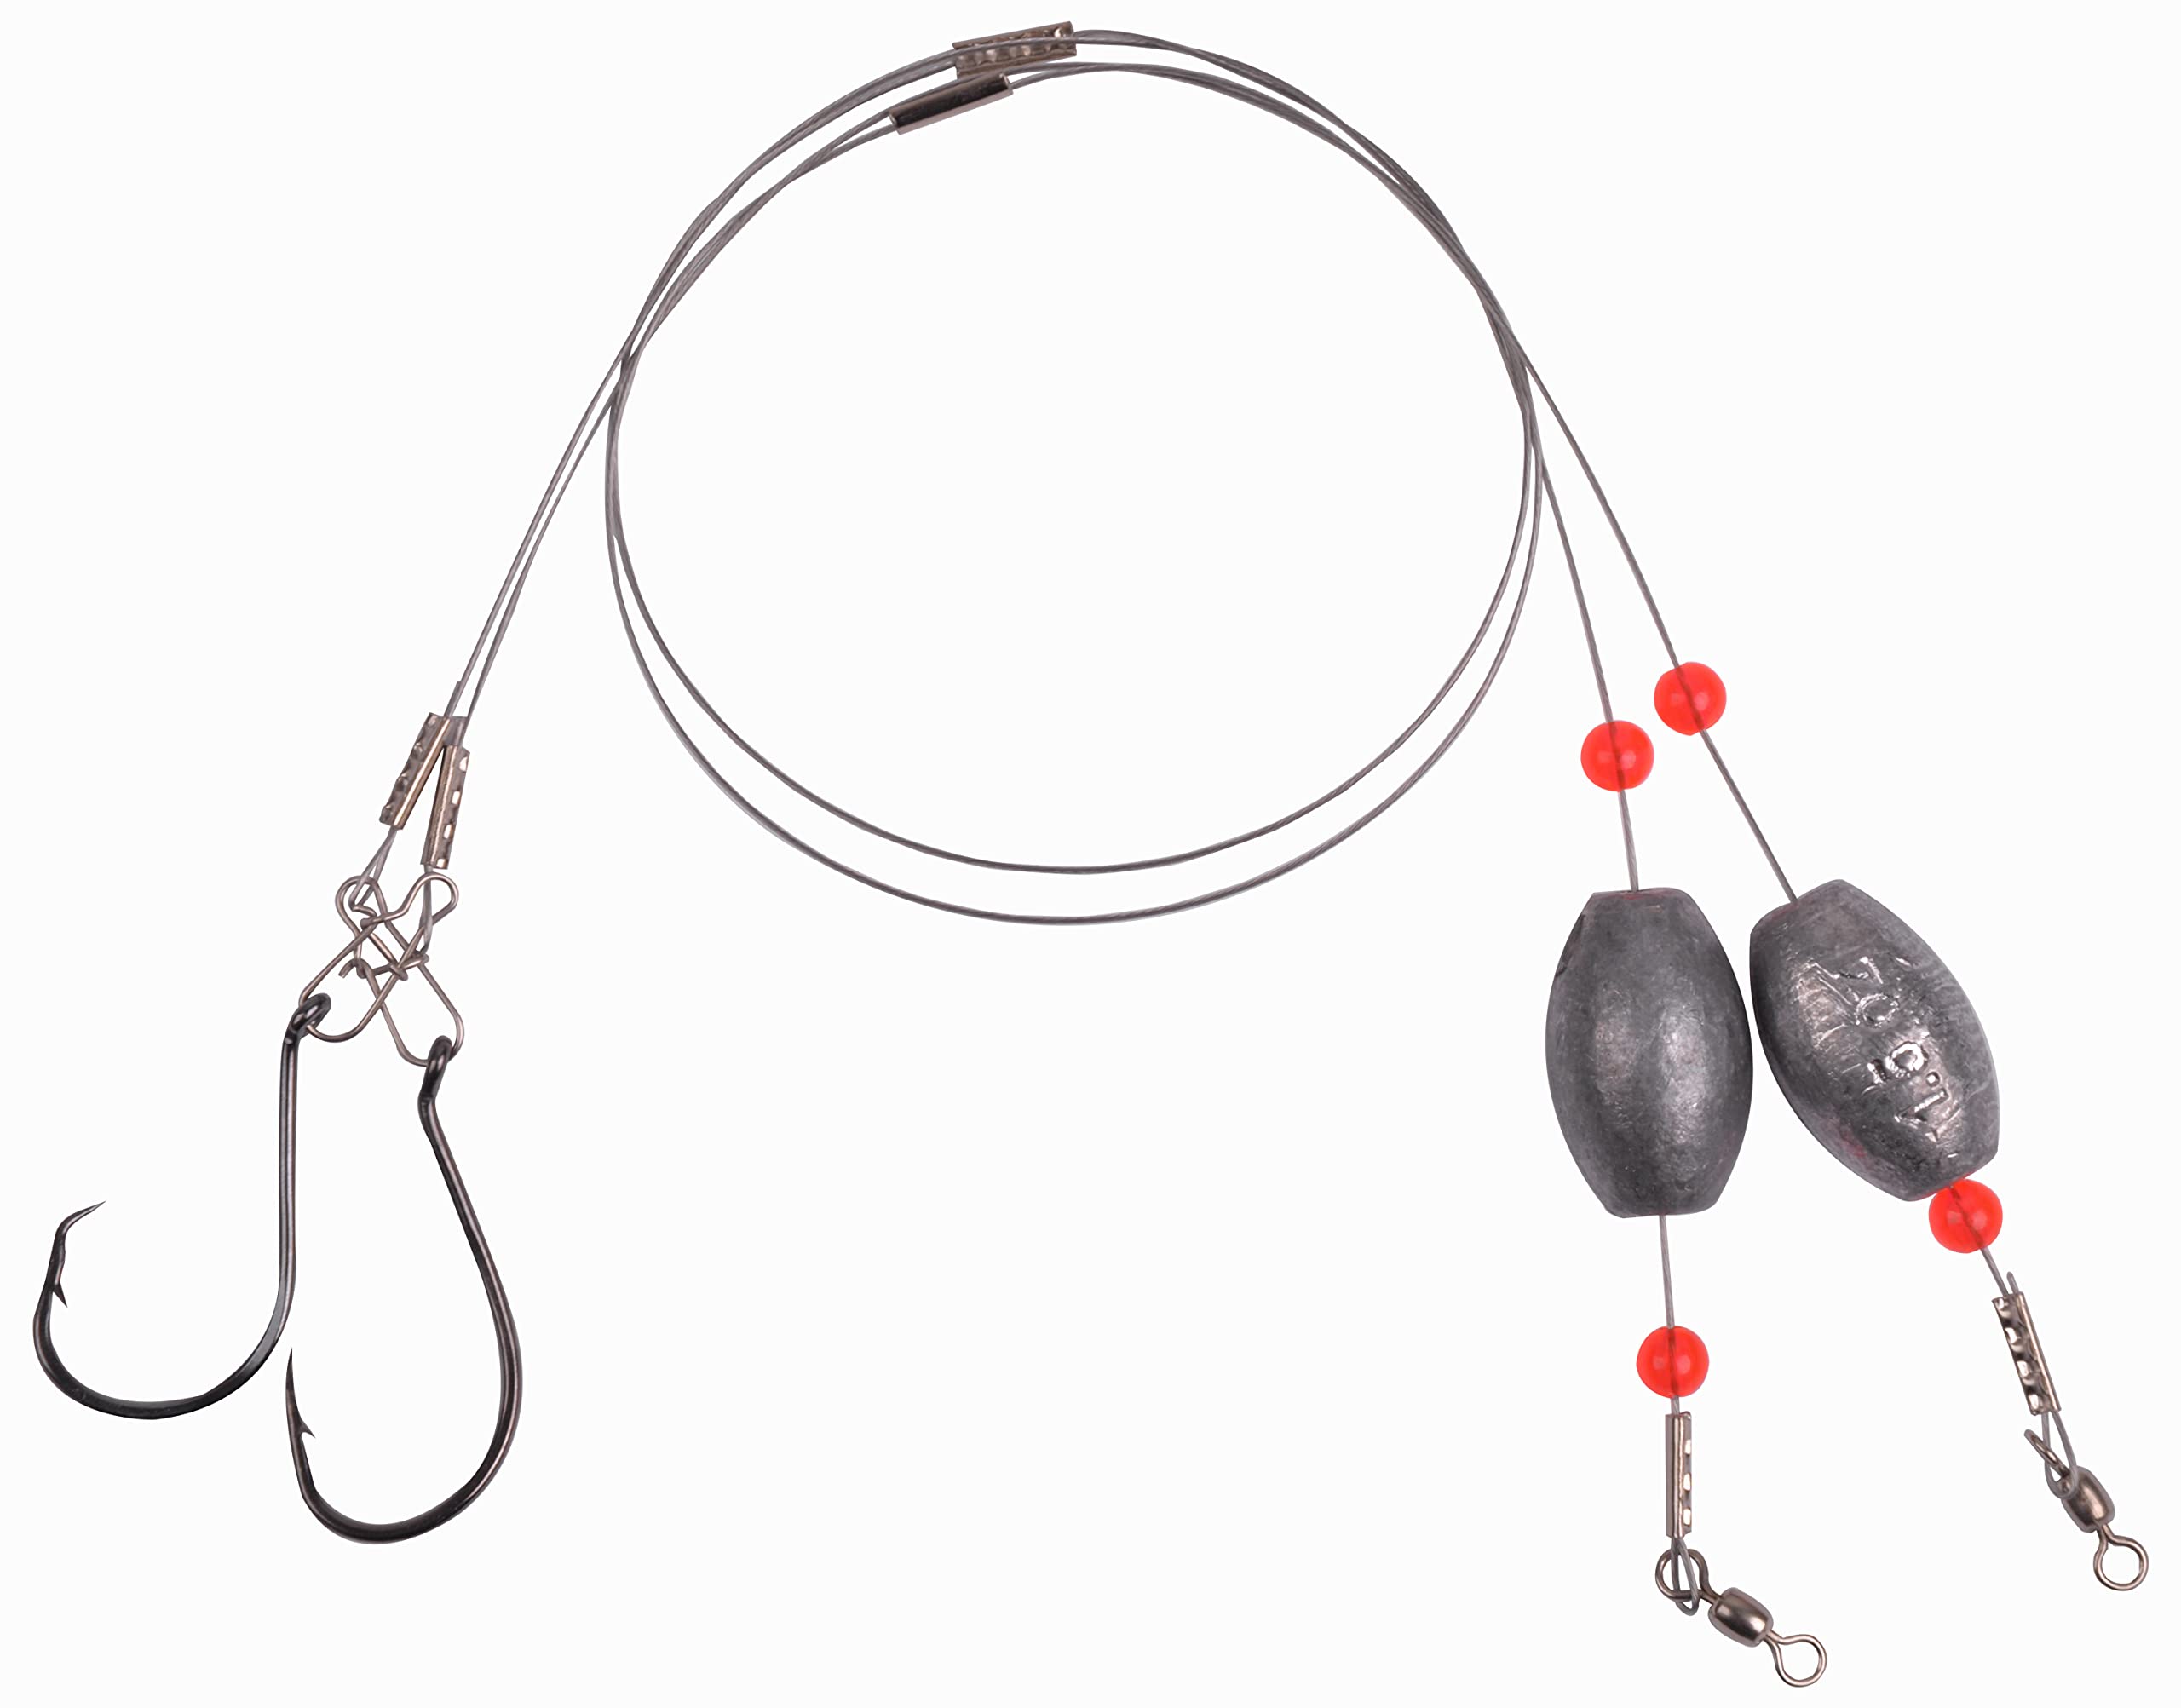 Snook Inlet Rig - Pack of 6 Hi Low Rigs for Fishing Saltwater Rigs - Live  Bait Rigs with Swivel and Egg Sinkers for Snook - Buy Online - 101608462